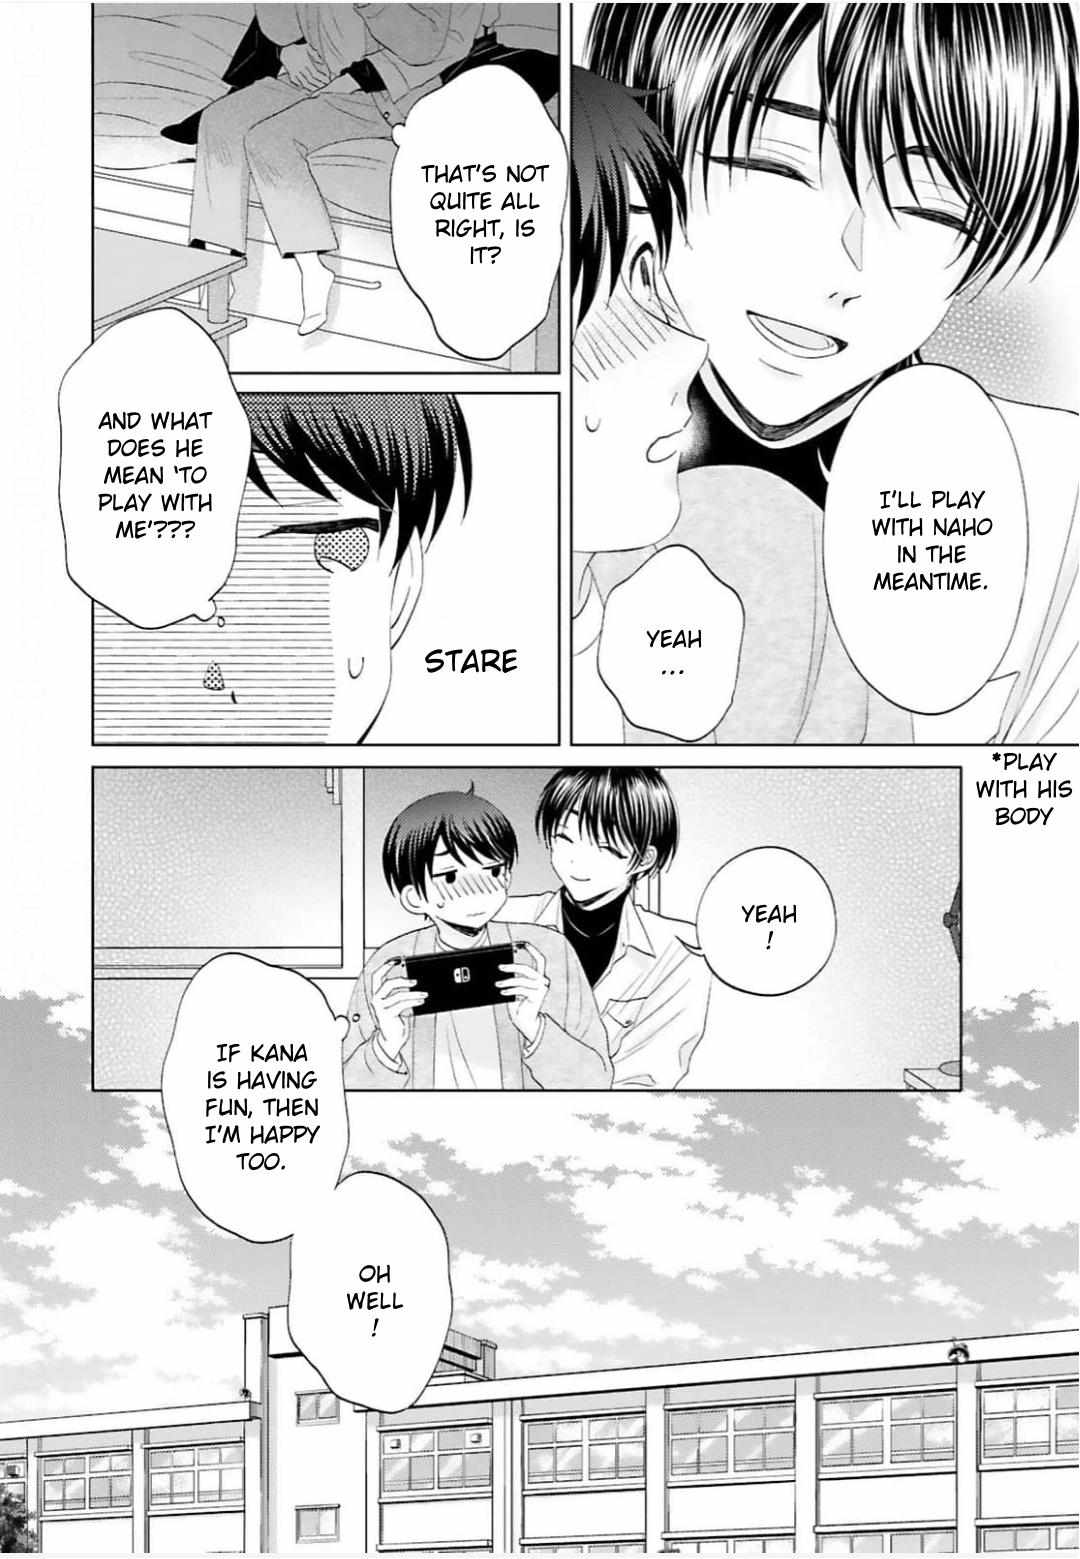 My Cutie Pie -An Ordinary Boy And His Gorgeous Childhood Friend- 〘Official〙 - 10 page 16-51f04302